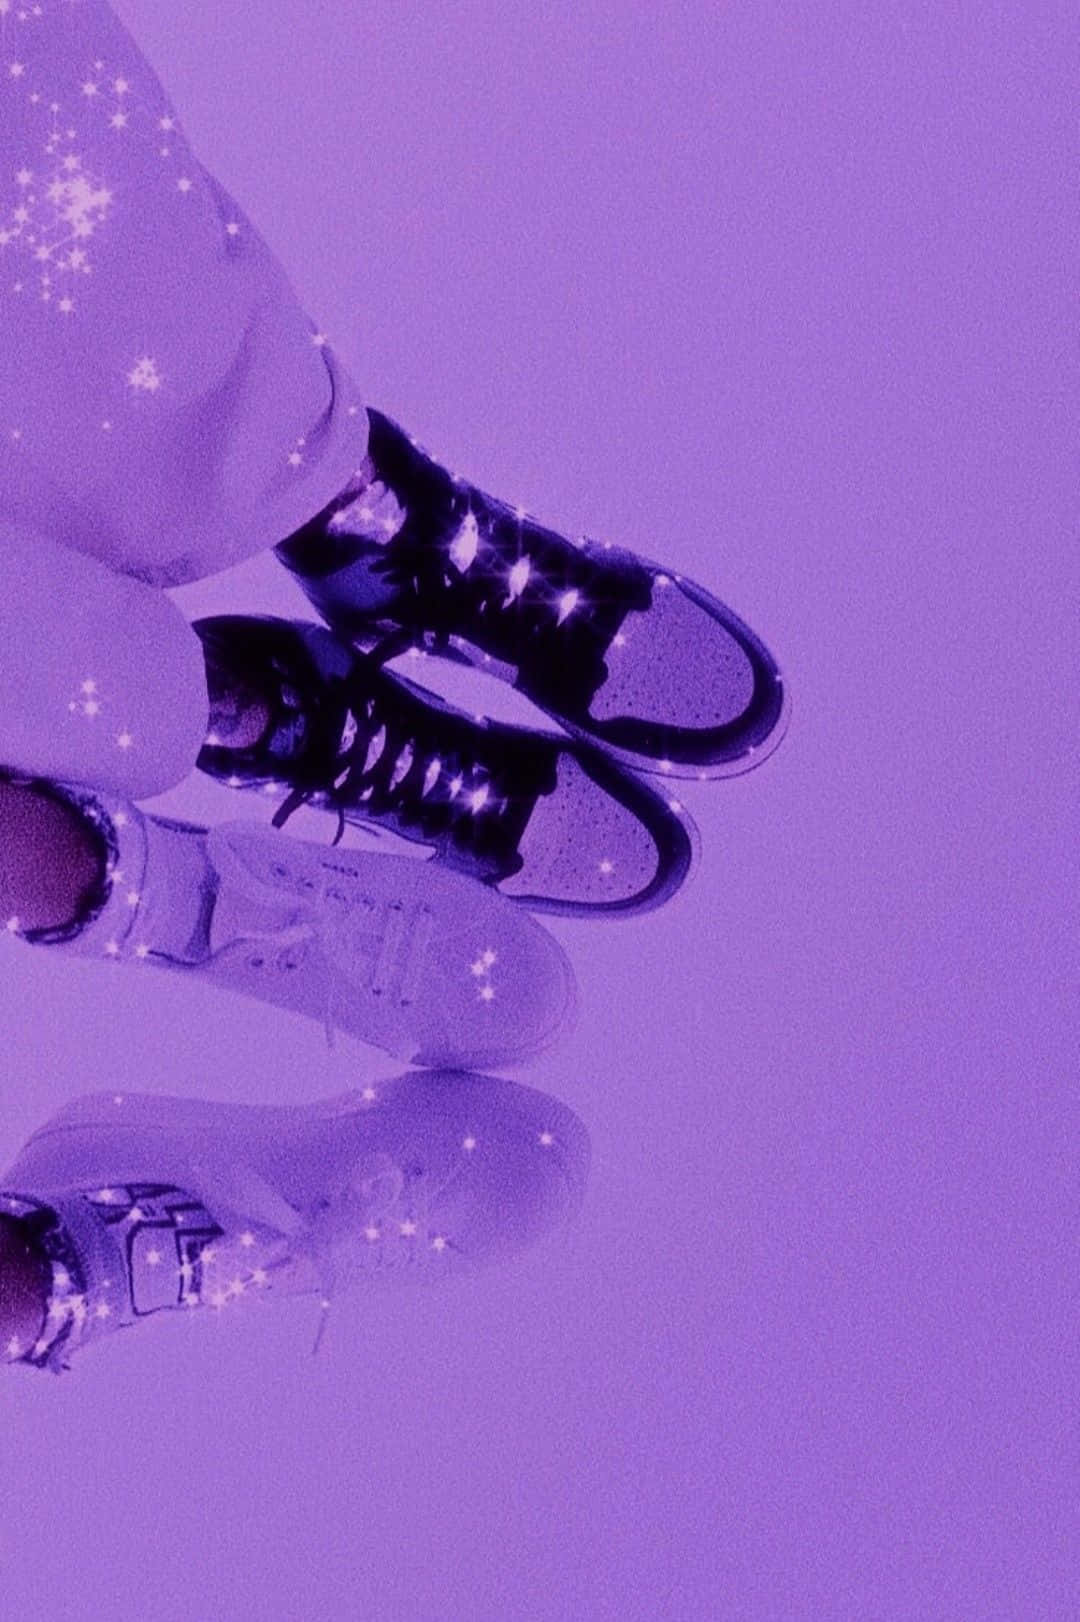 A pair of feet wearing trainers on a purple background - Shoes